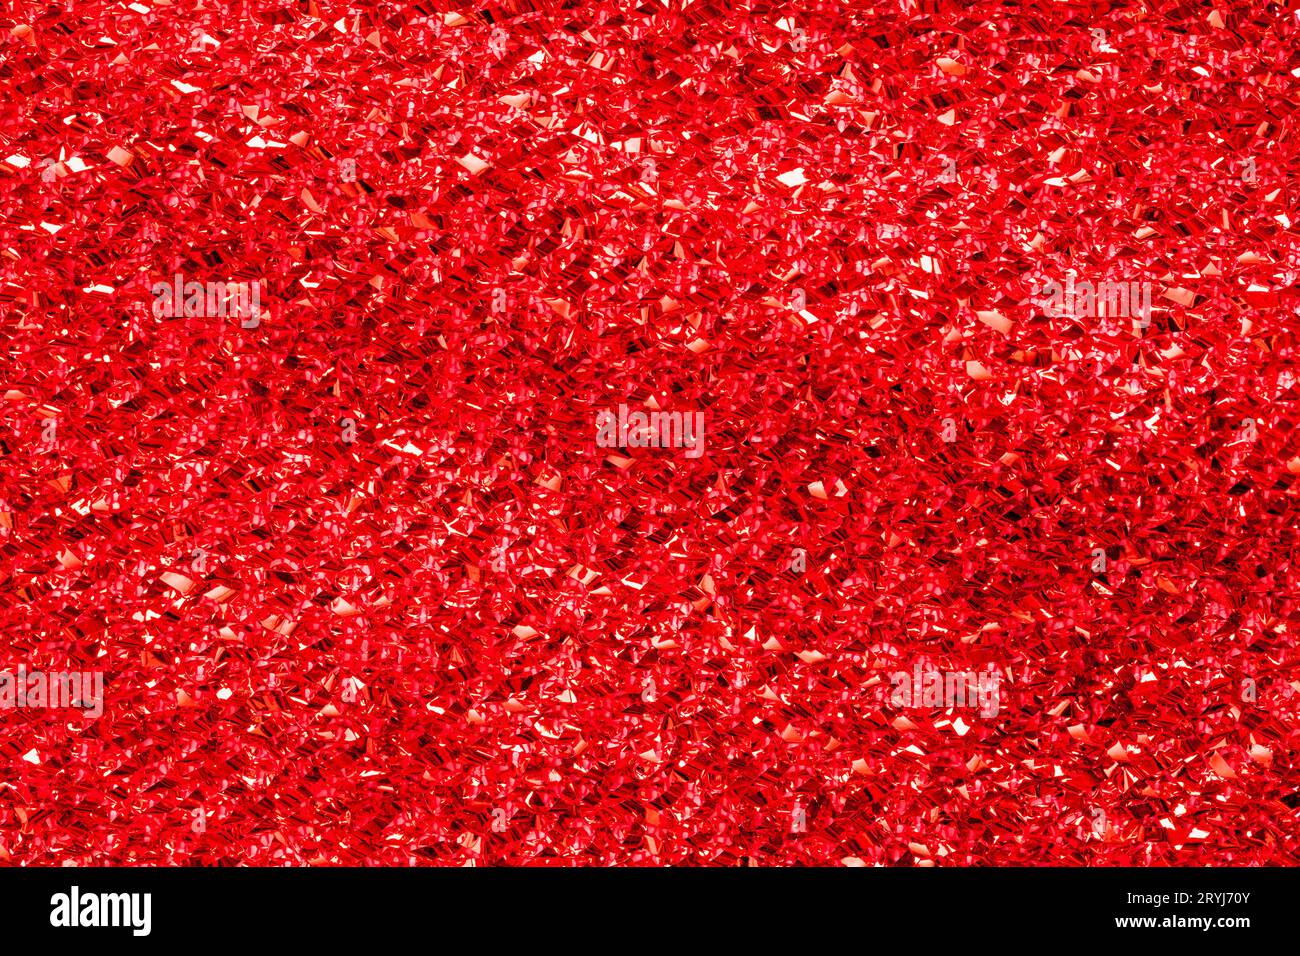 Red Shiny Fabric Glitter Texture Background Close Up. Stock Photo